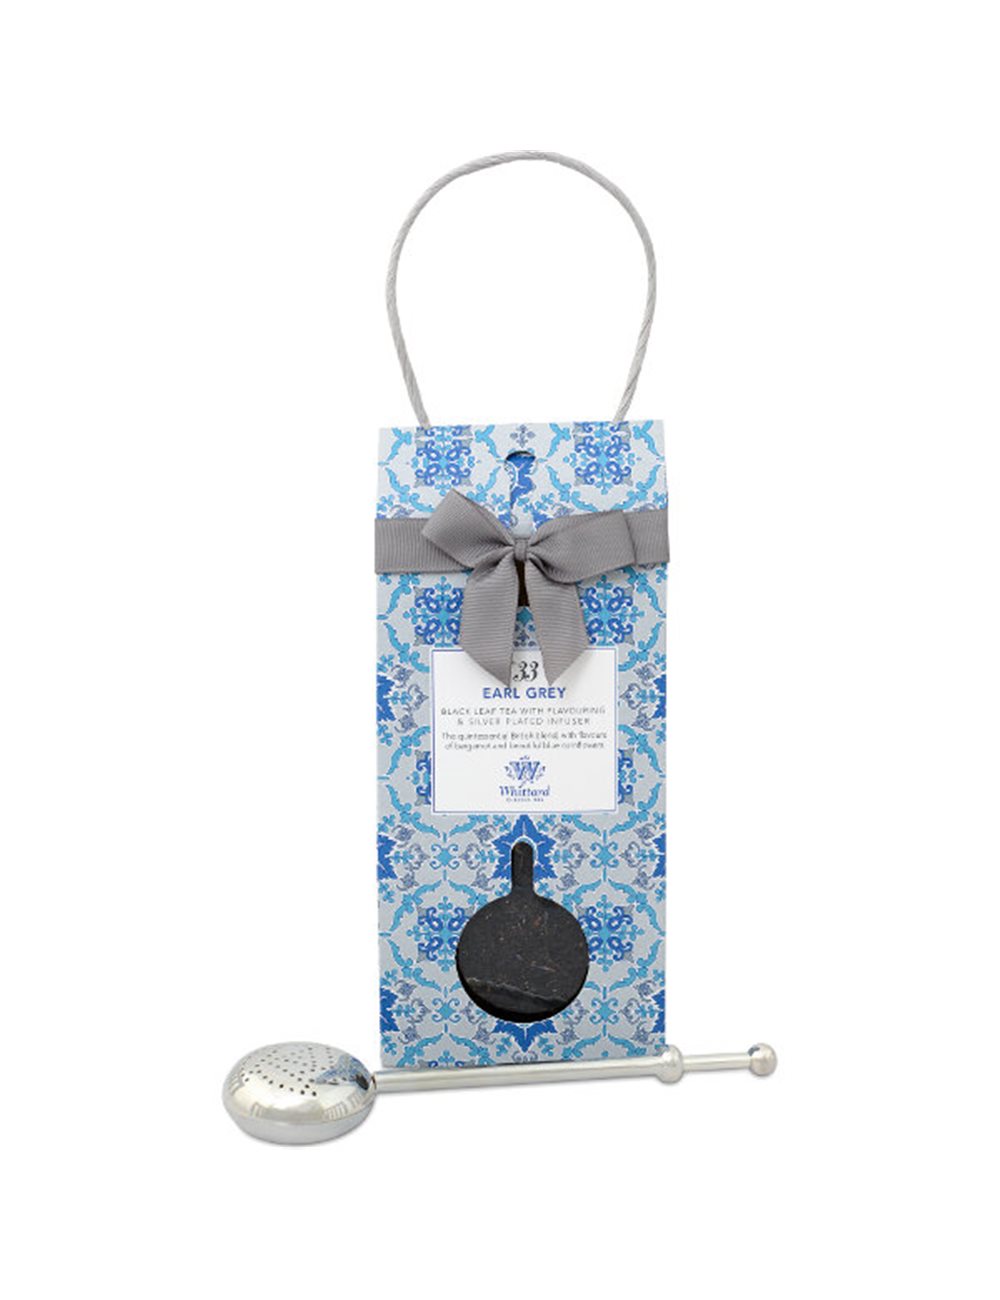 Loose Earl Grey Tea Pouch & Infuser Tea Discoveries 100g